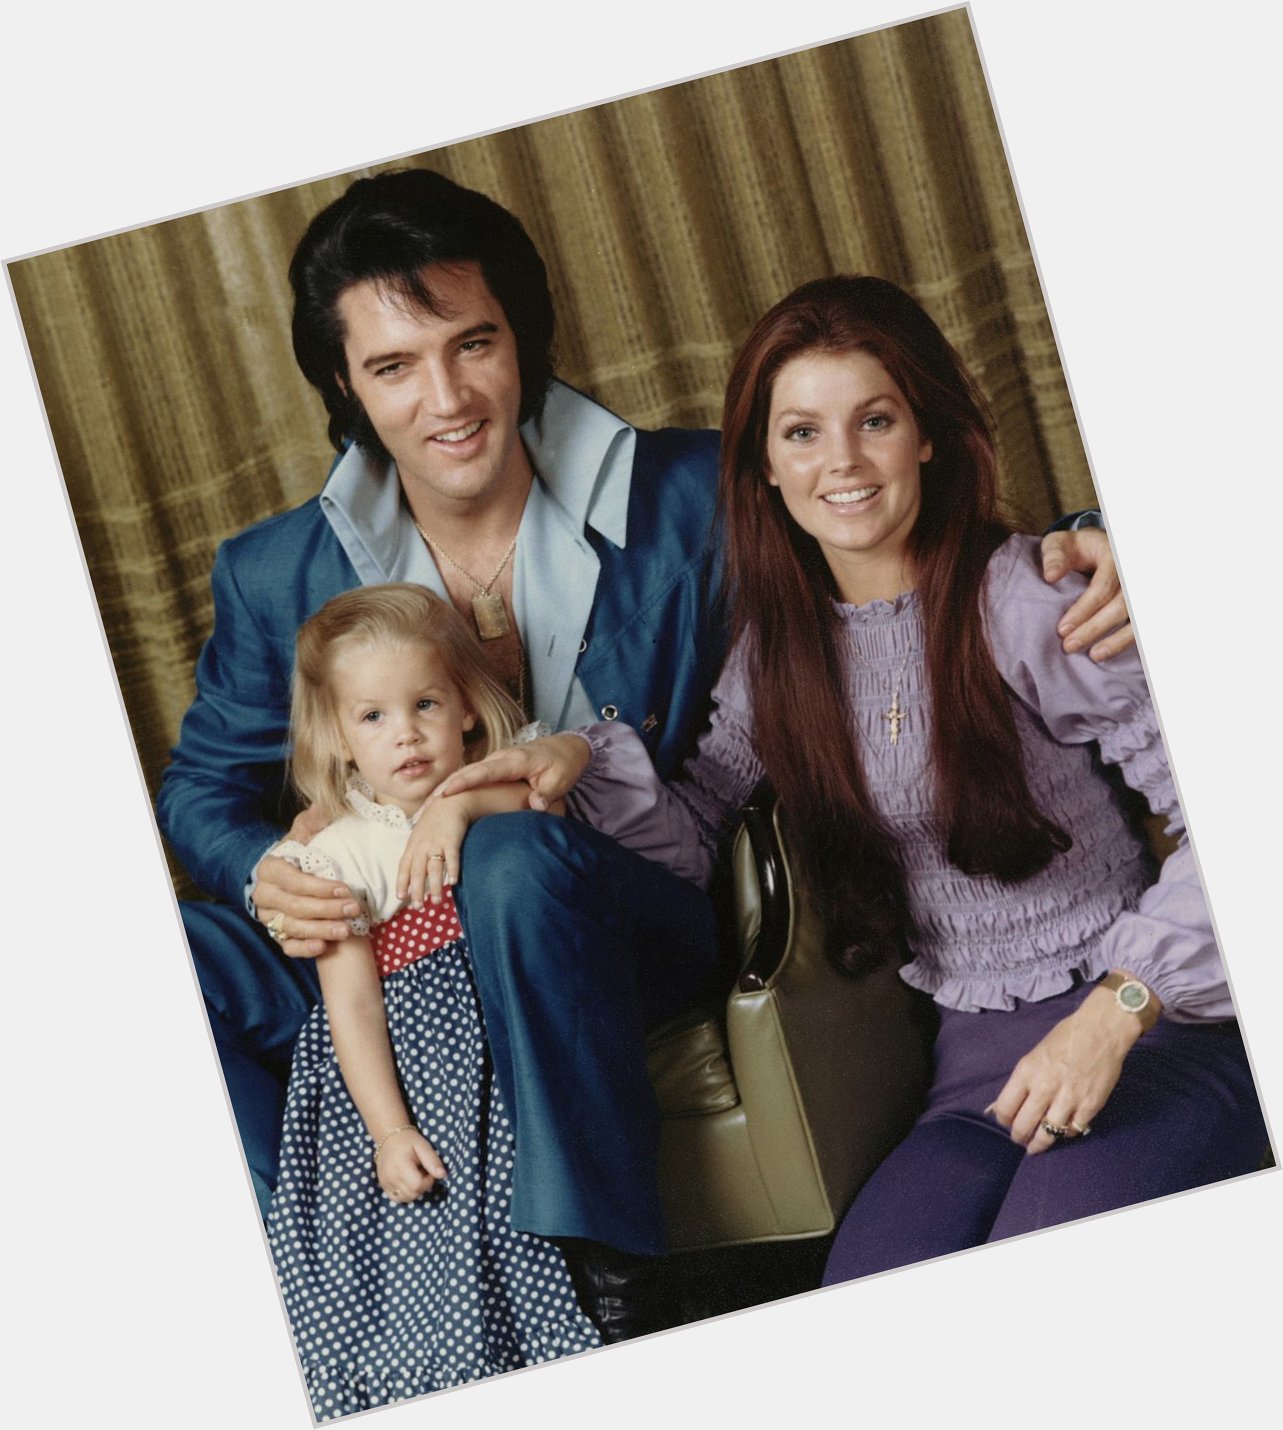 Happy Birthday, Priscilla Presley! We can\t wait to see you at Elvis Week!! 